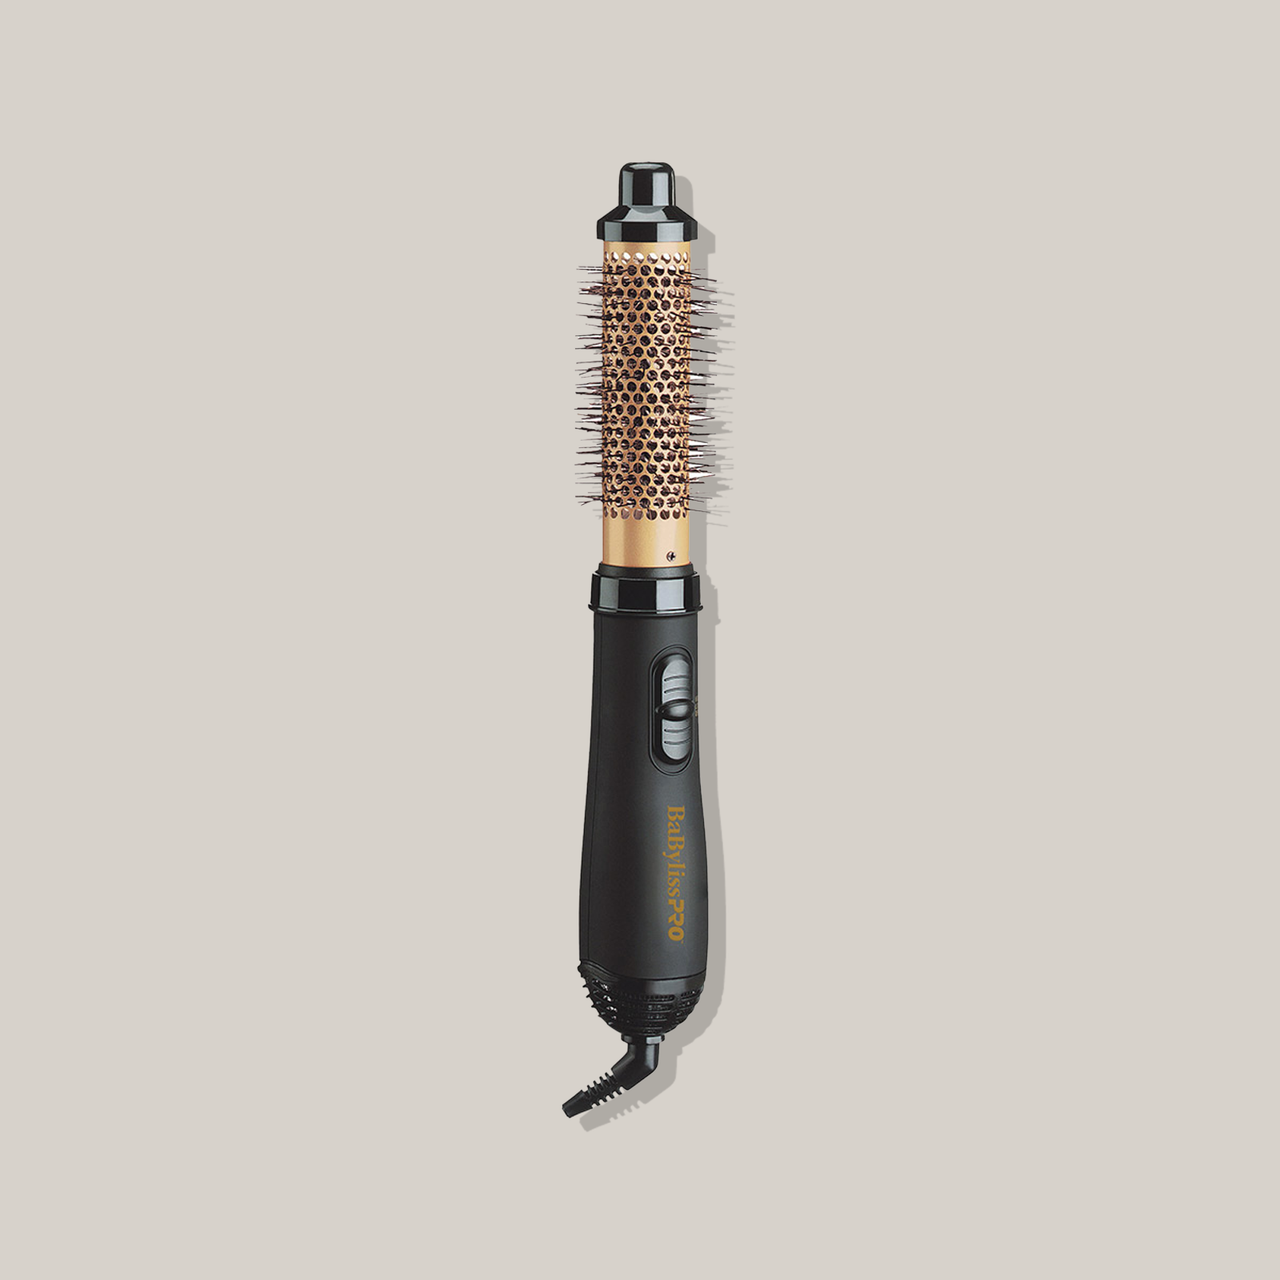 Babylisspro 11/4" Electric Hot Air Styler IS2100C 